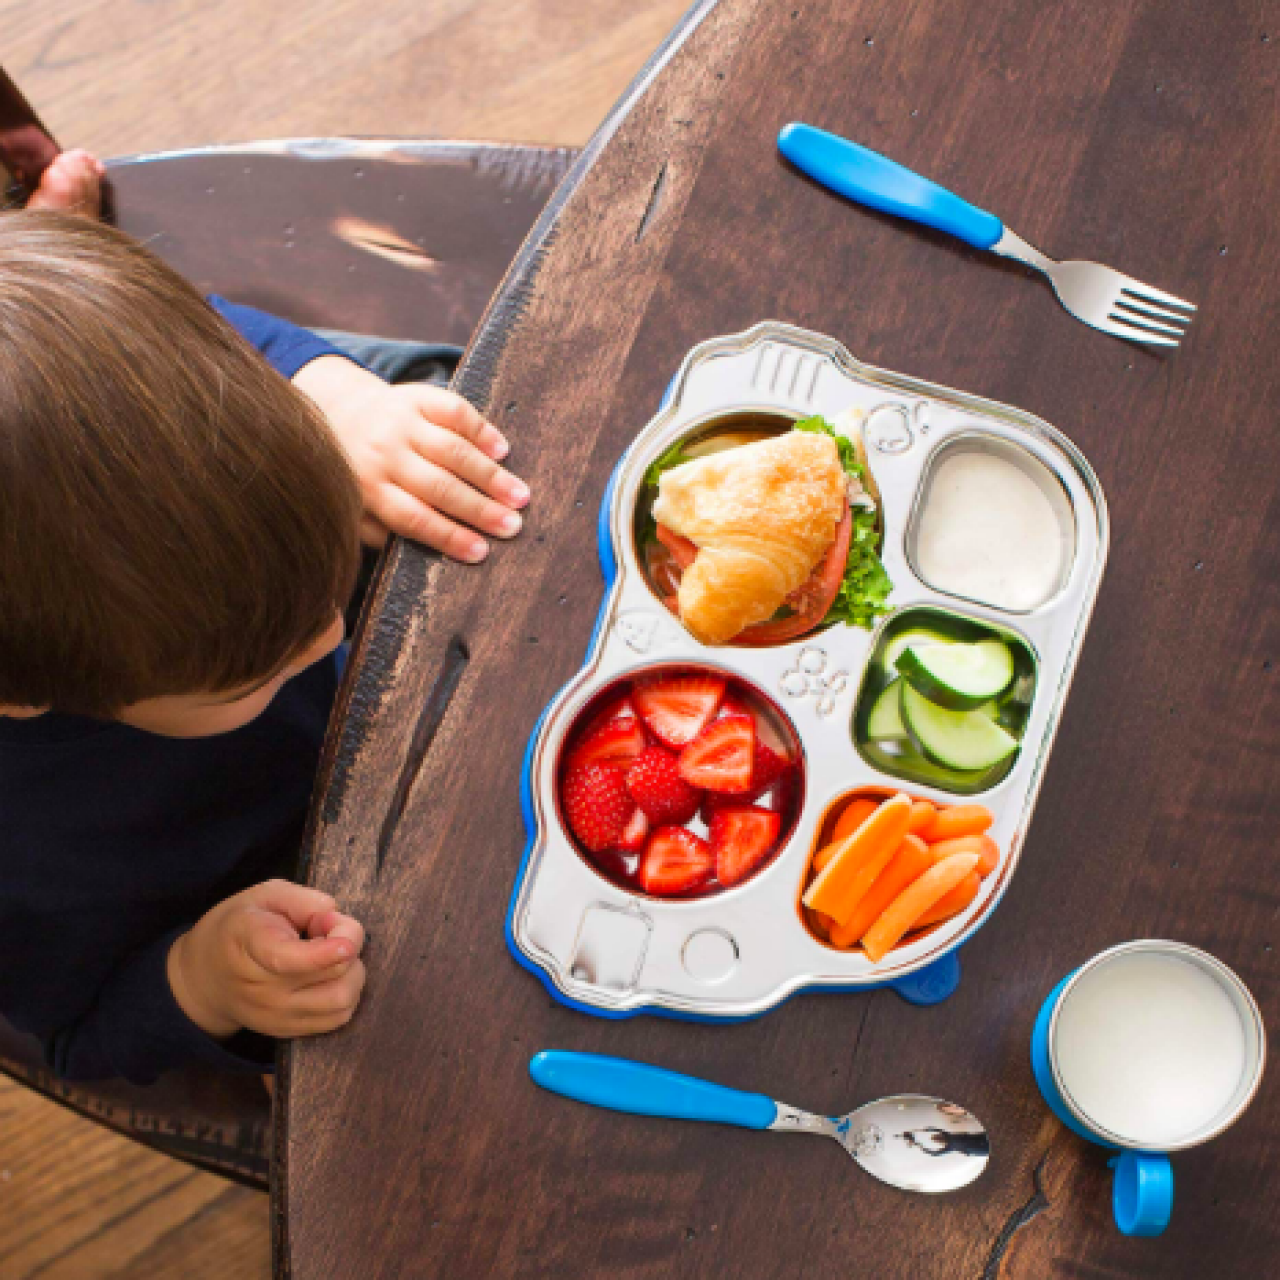 Plate separators for fussy eaters: This invention divides your